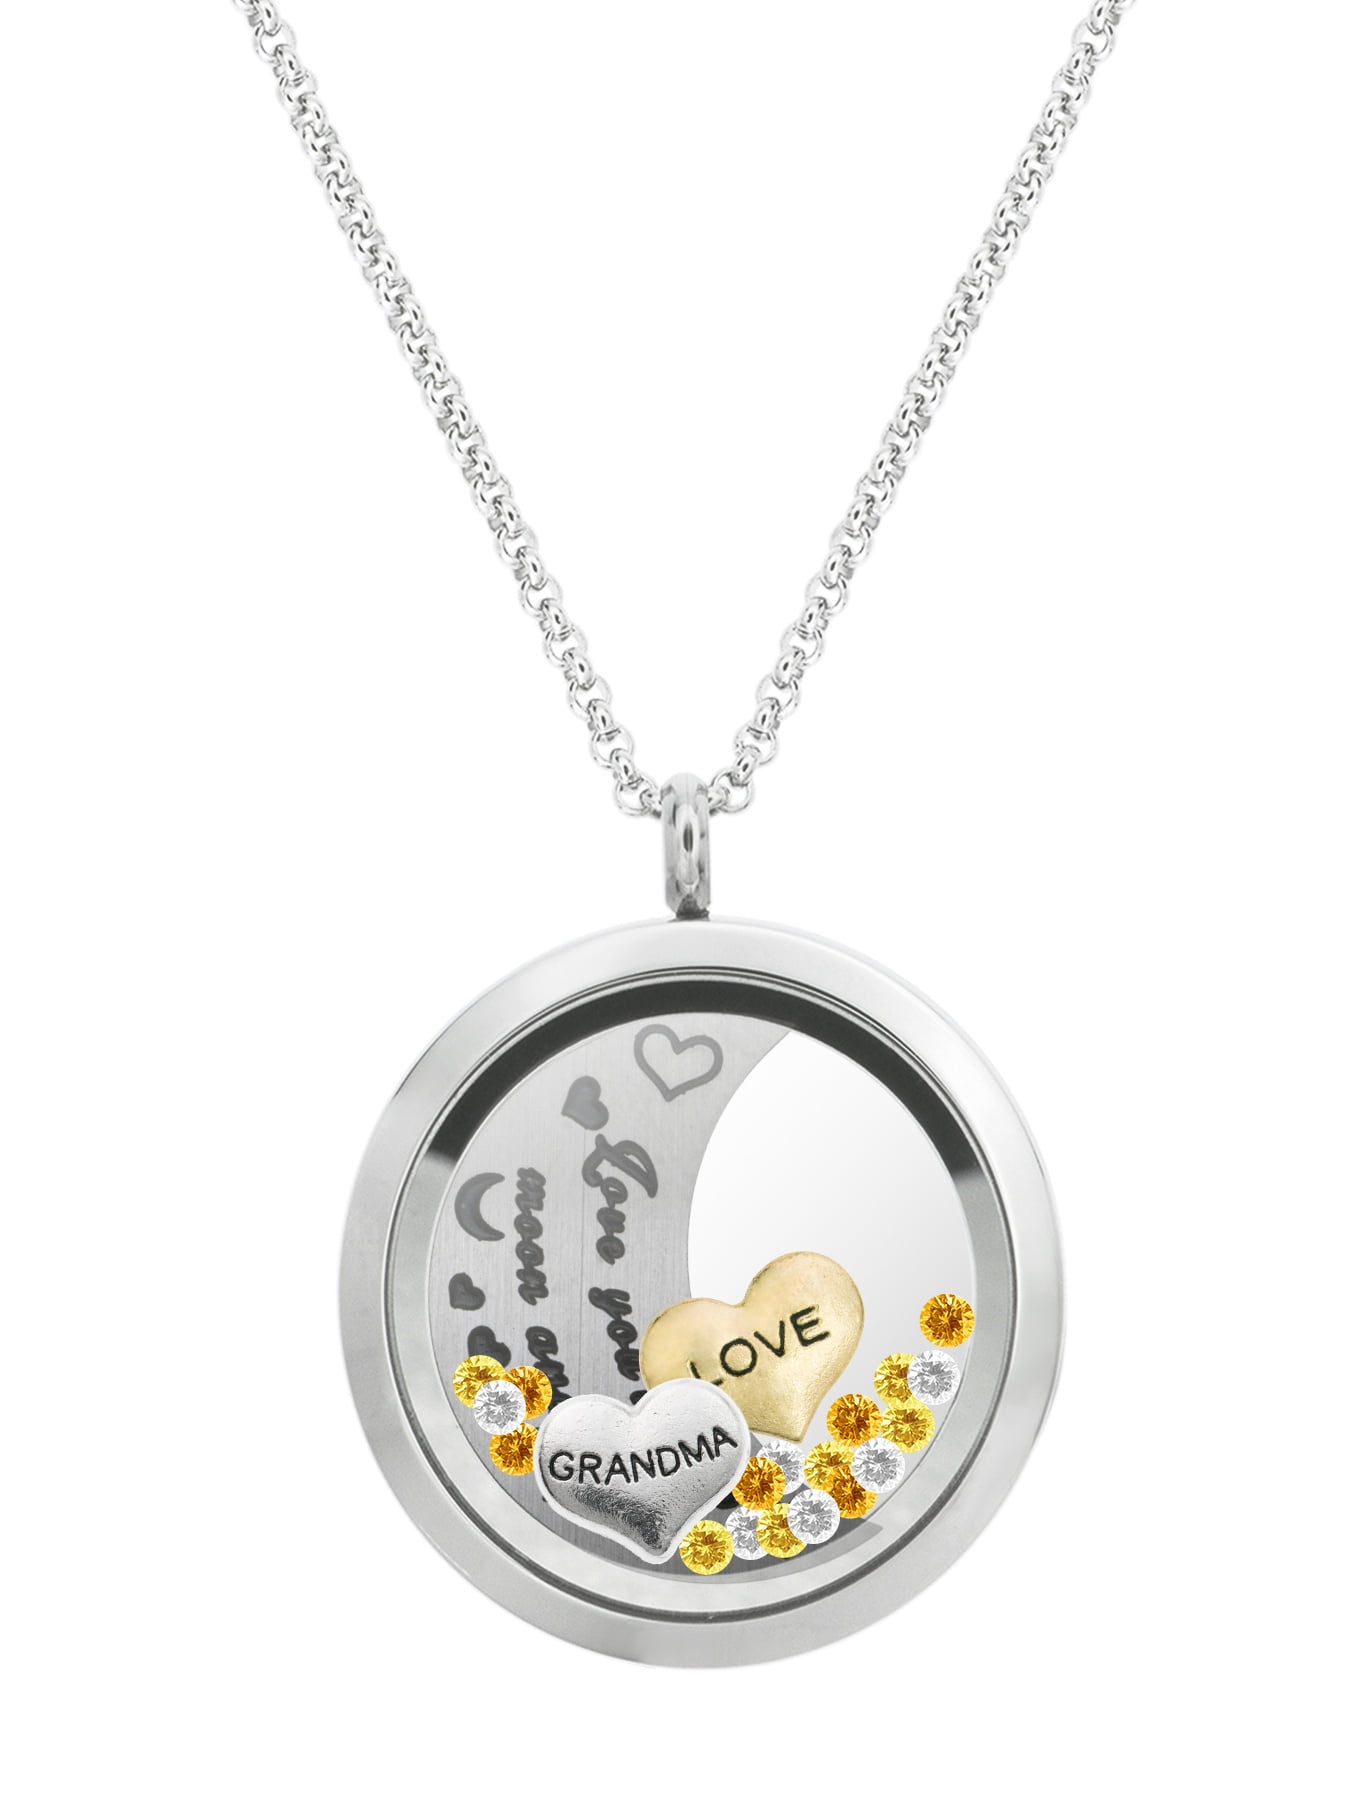 Queenberry Love You to The Moon and Back Family Floating Locket Crystal Charm Pendant Necklace